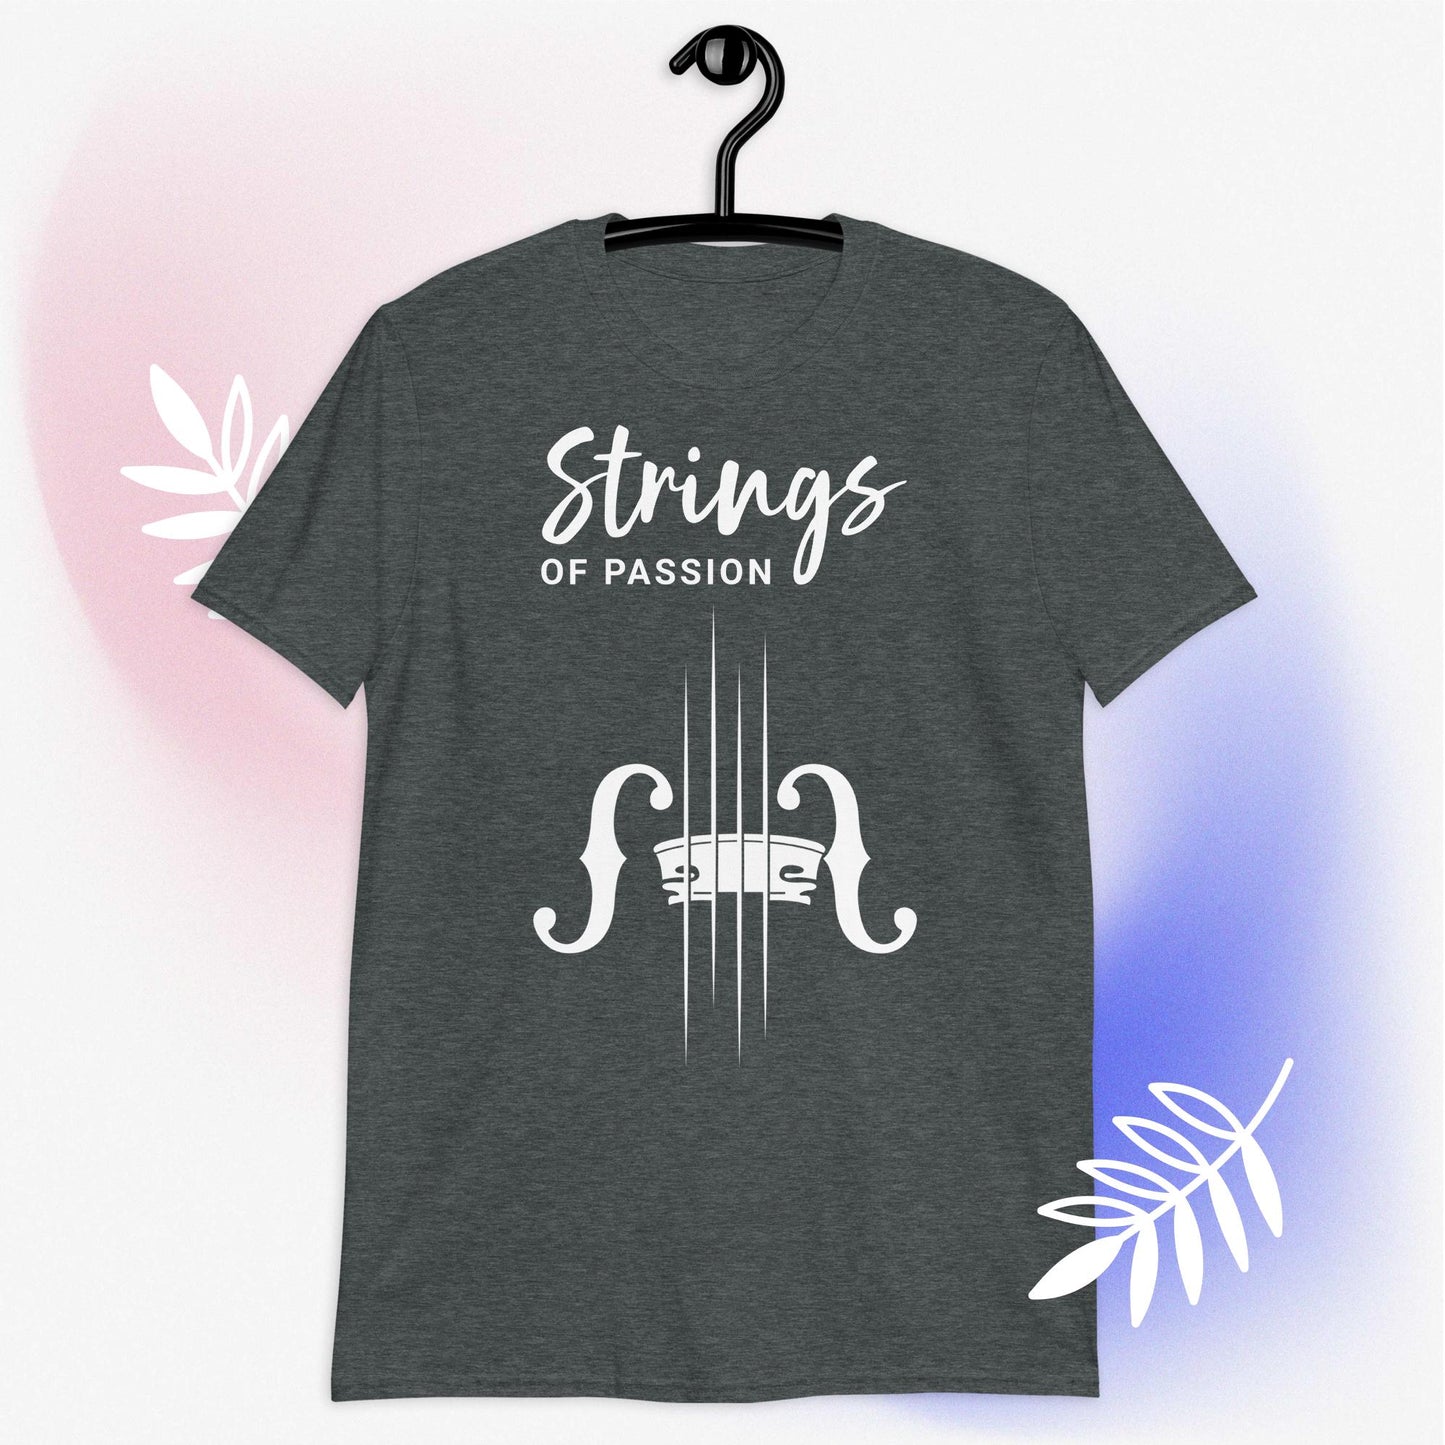 Strings of Passion. Unisex T-Shirt